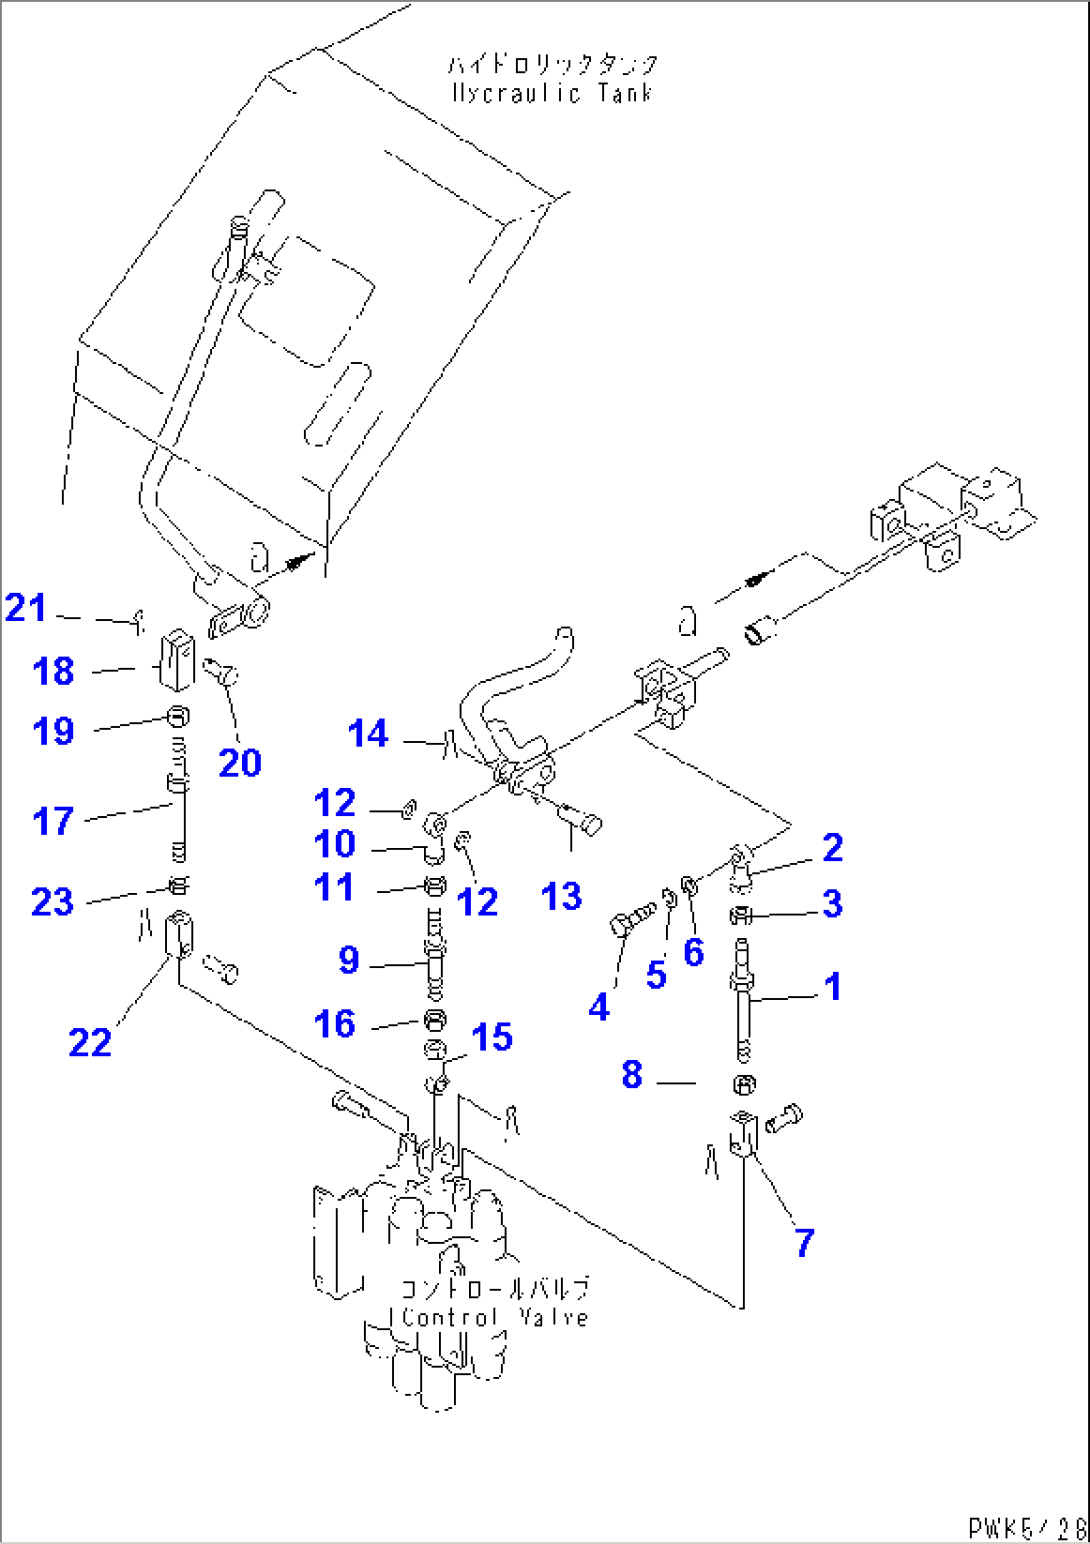 WORK EQUIPMENT CONTROL (LEVER¤ 2/2) (WITH 3-POINT HITCH)